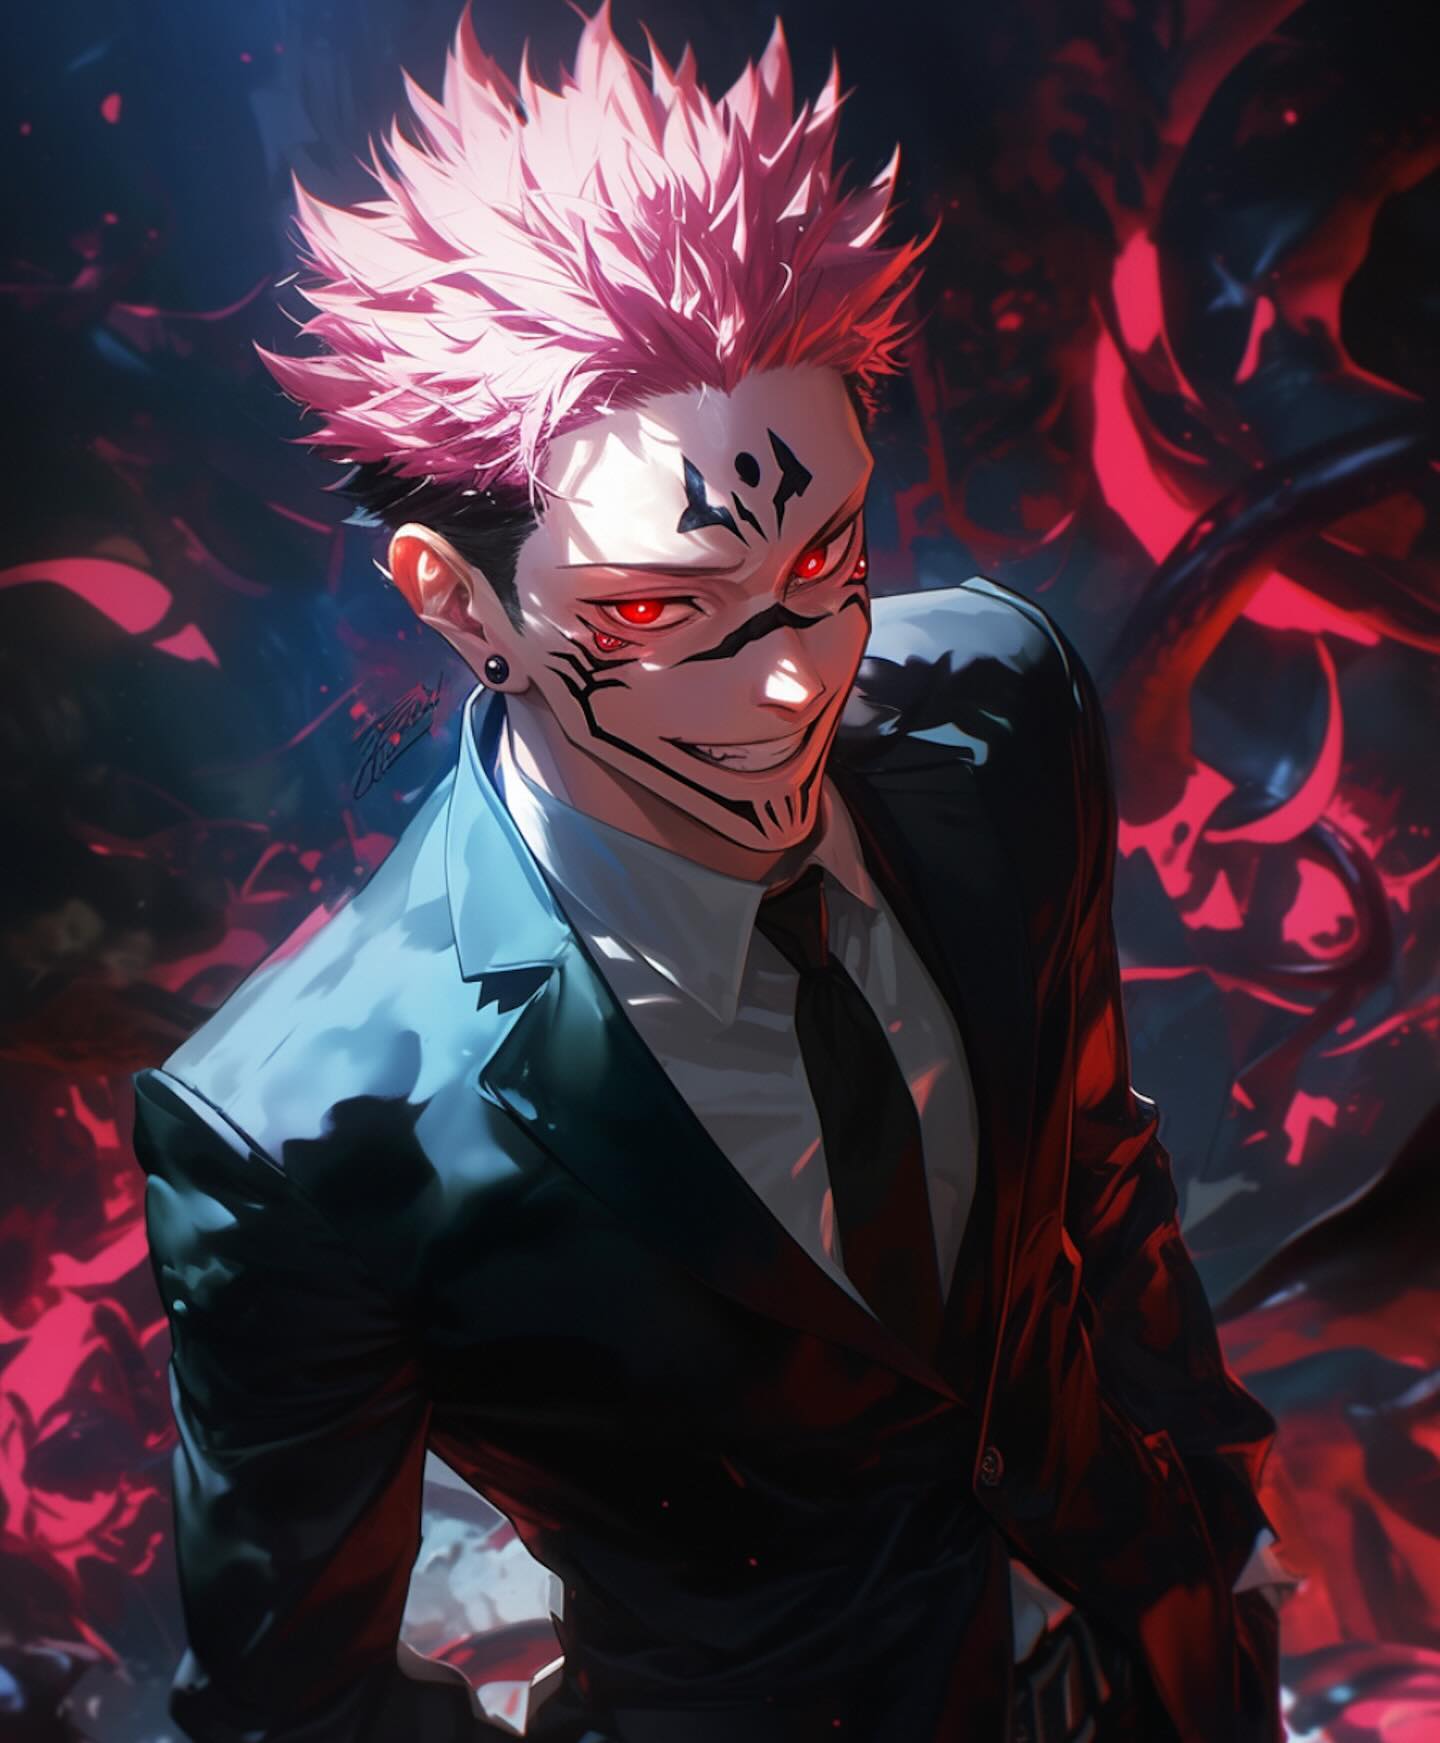 Ryomen Sukuna from Jujutsu Kaisen Does he look Good with a suit?-437296983_958399652140969_7048112261912871243_n 